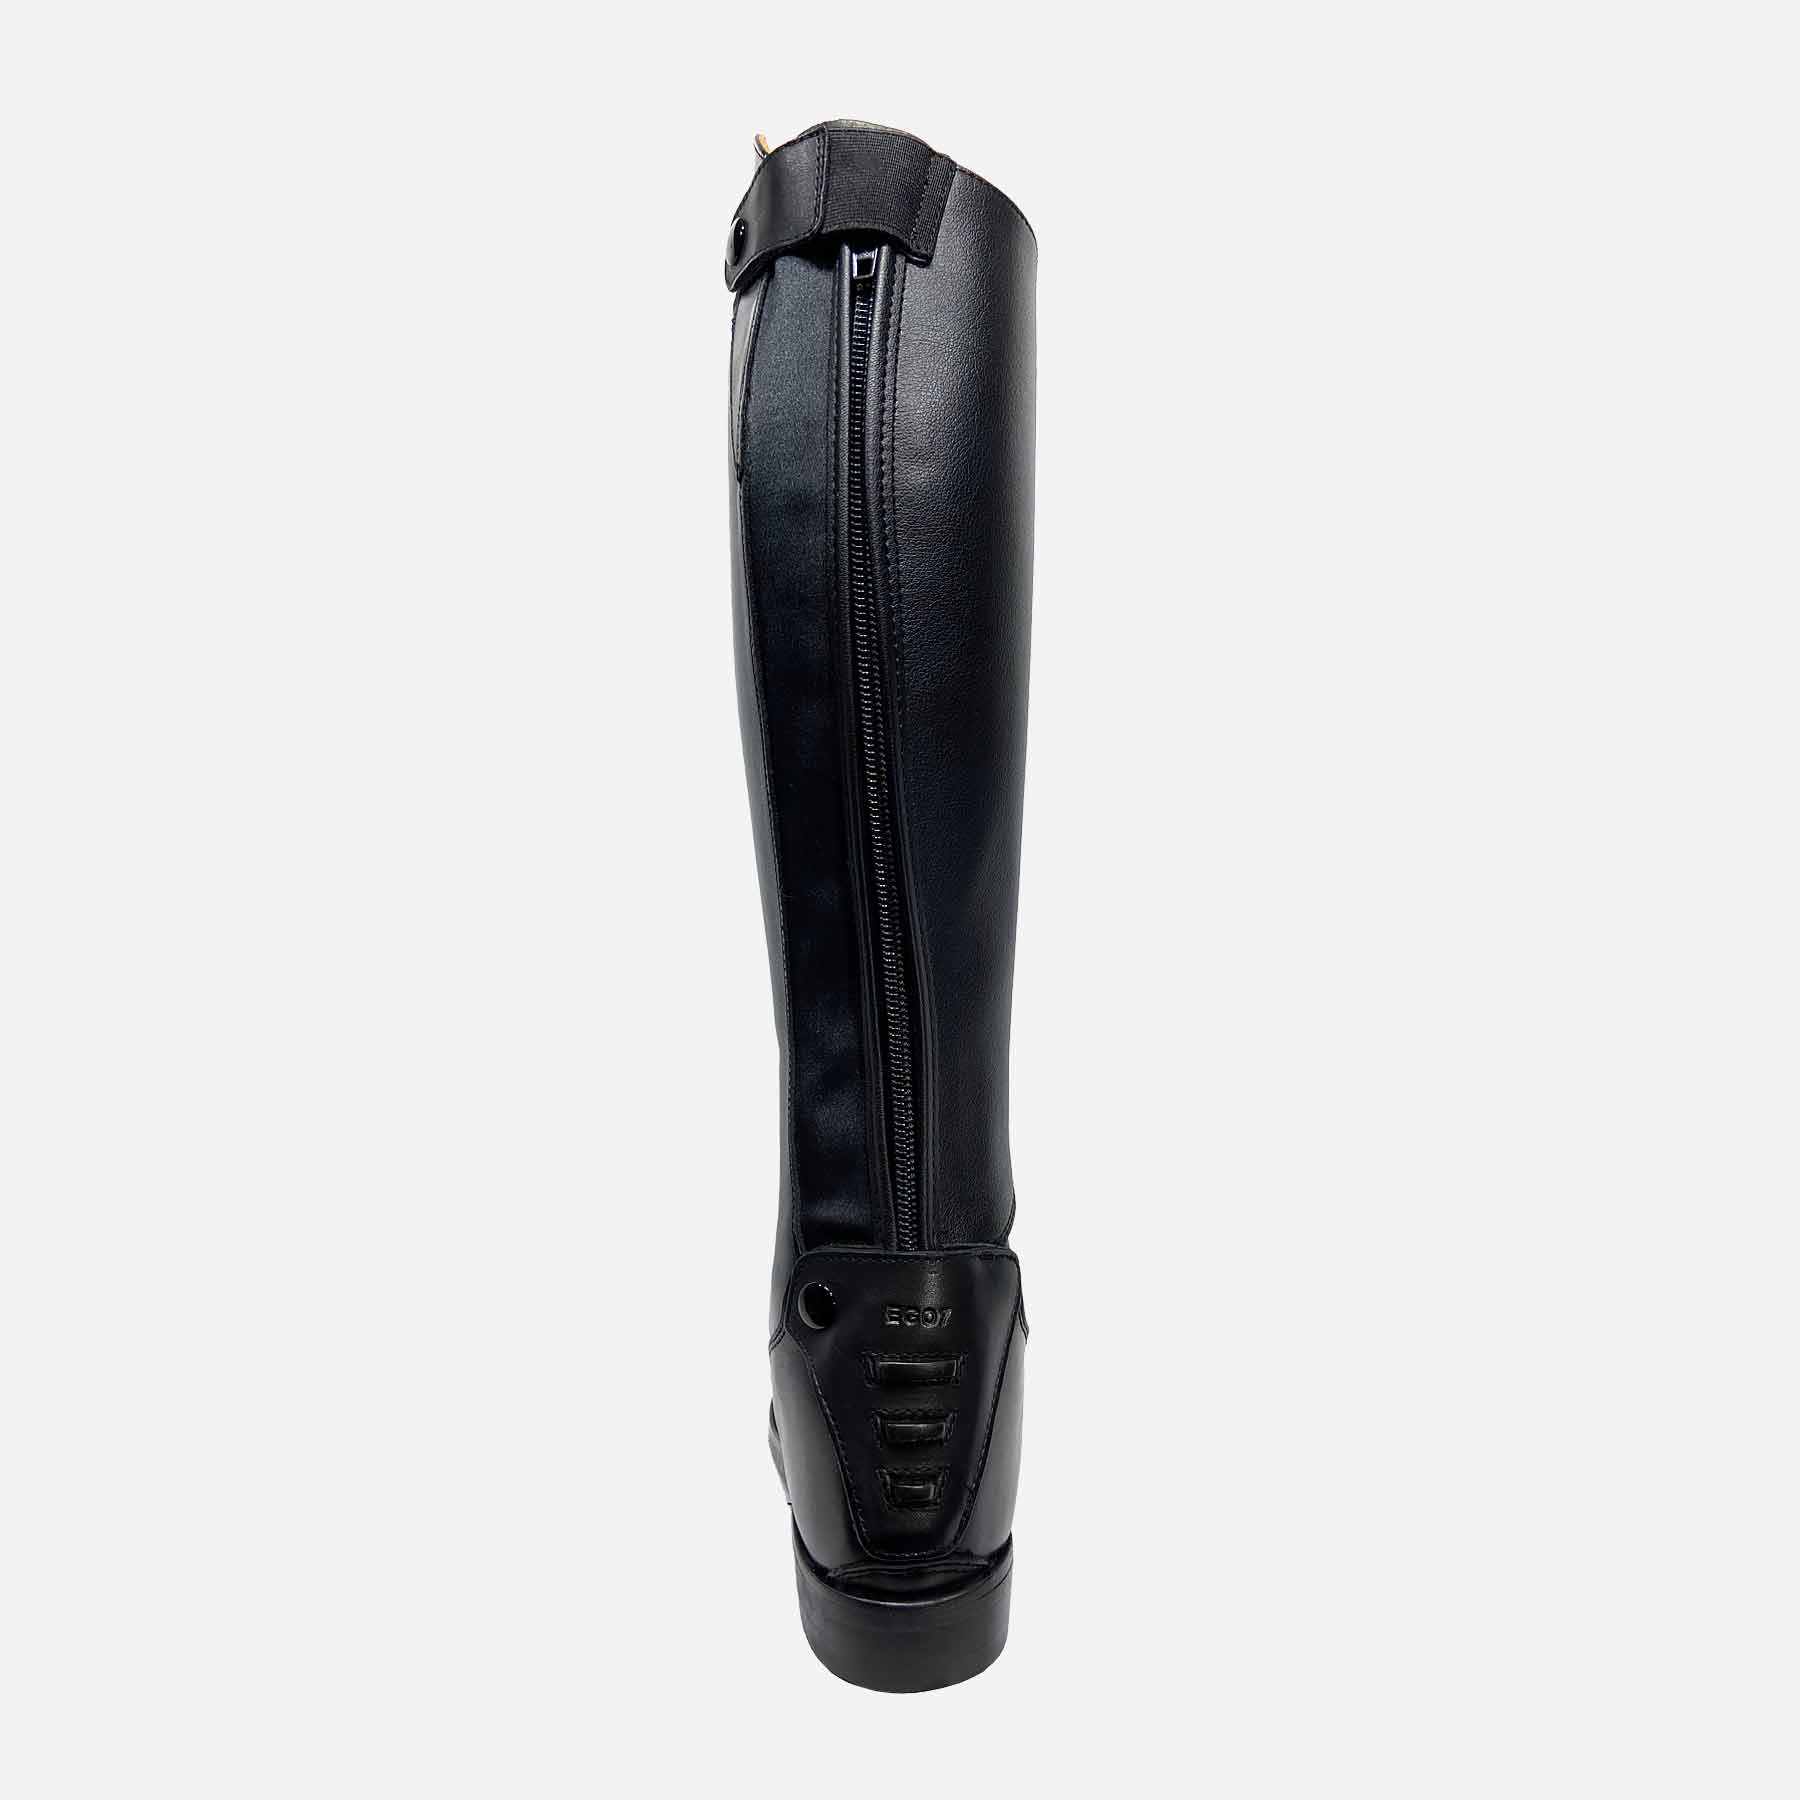 Ego7 Riding Boot | Orion | Black